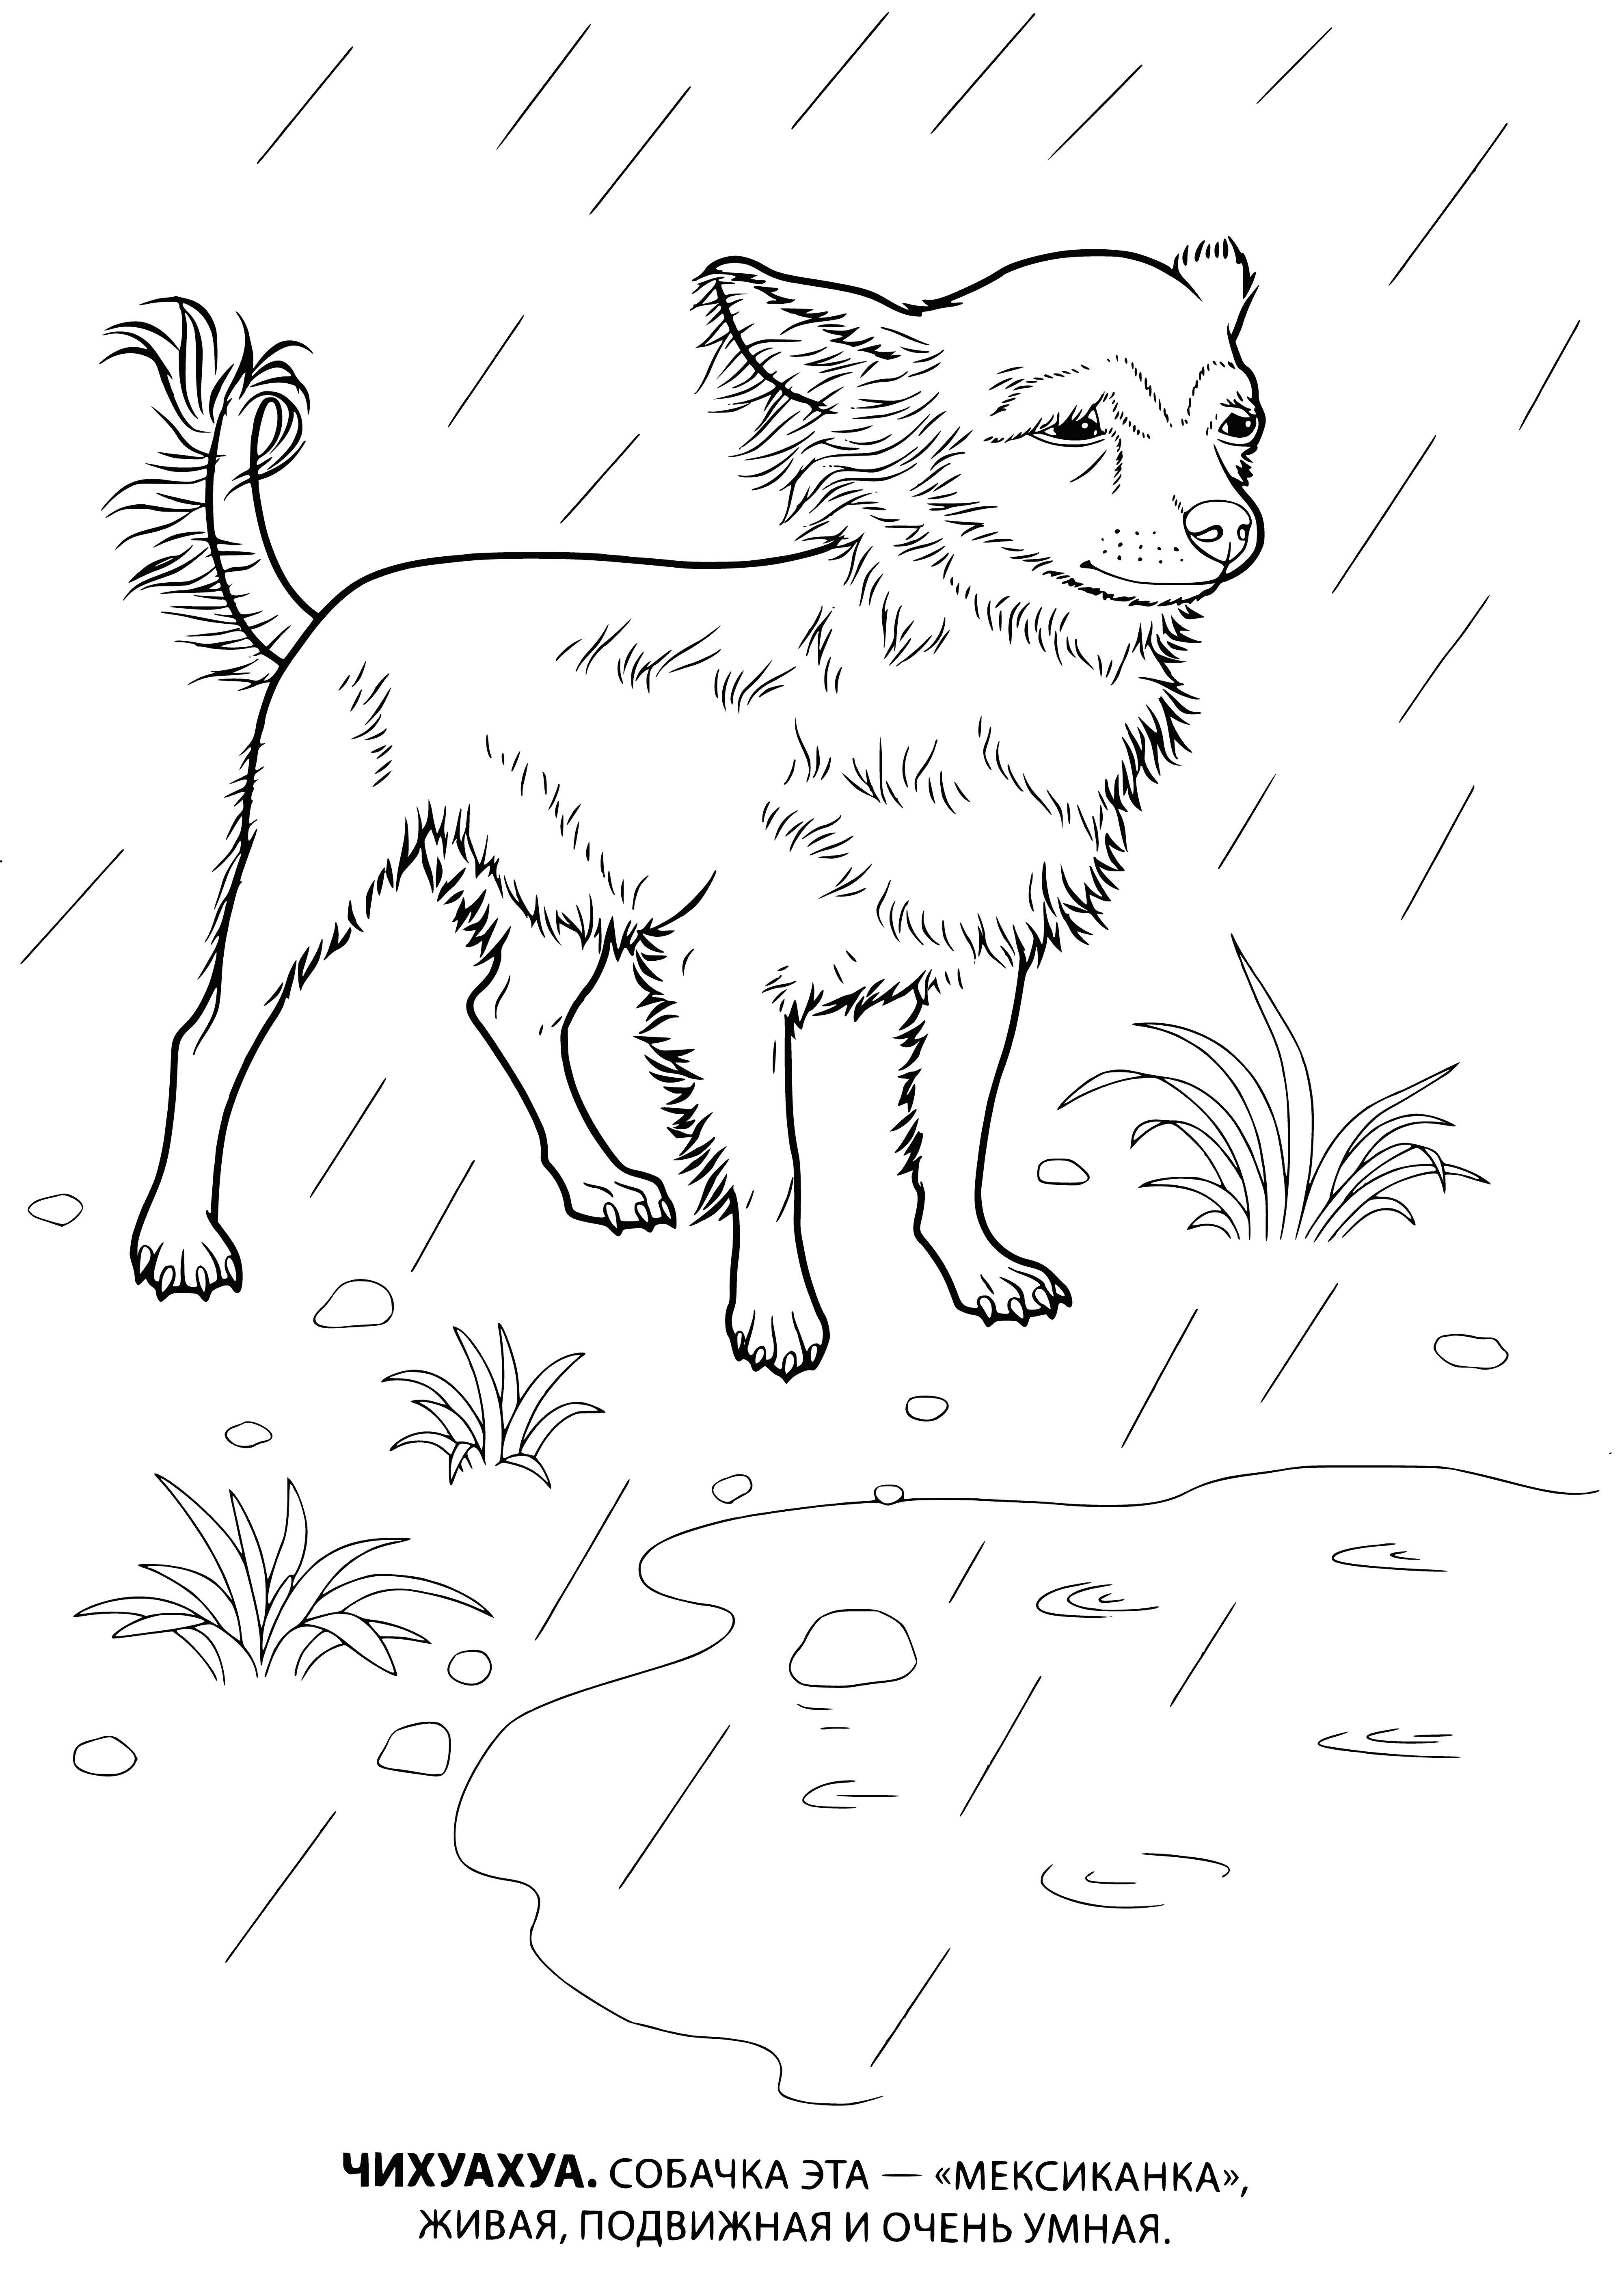 coloring page: A small tan dog walks on a leash with its owner in this coloring page. #coloringpages #doglovers